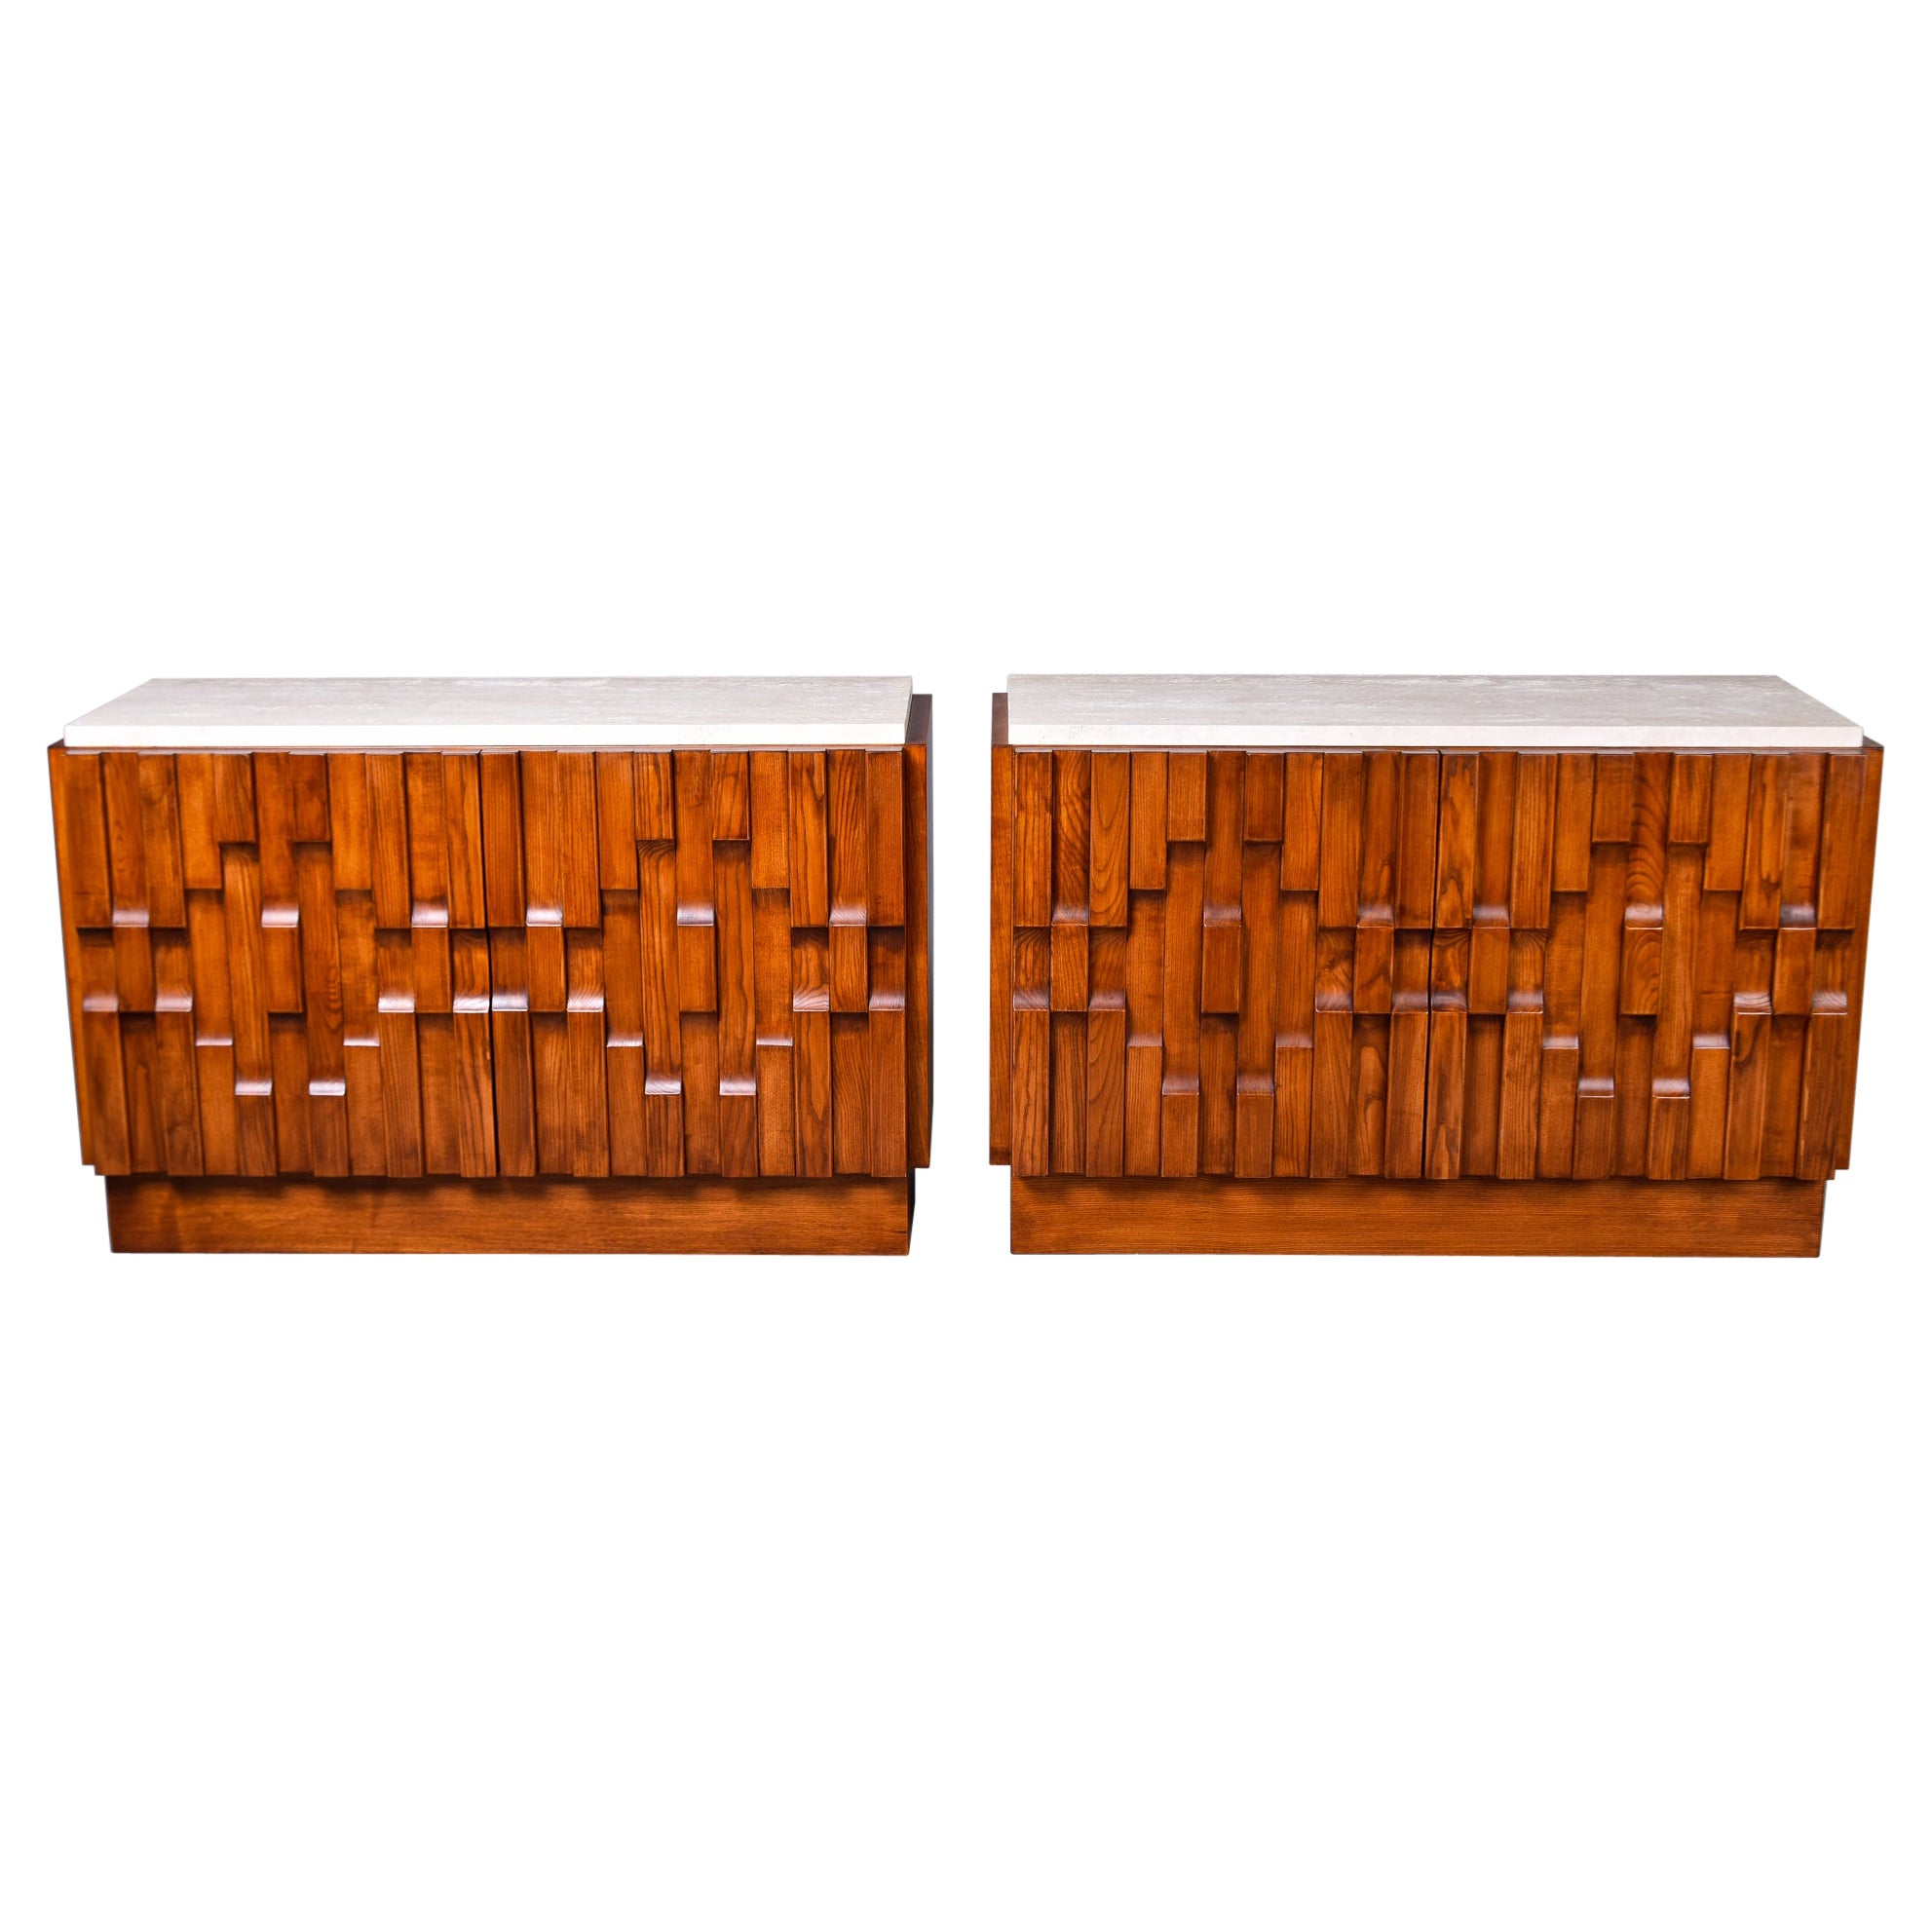 Pair Bespoke Brutalist Style Oak Chests with Travertine Tops   Cabinets without 